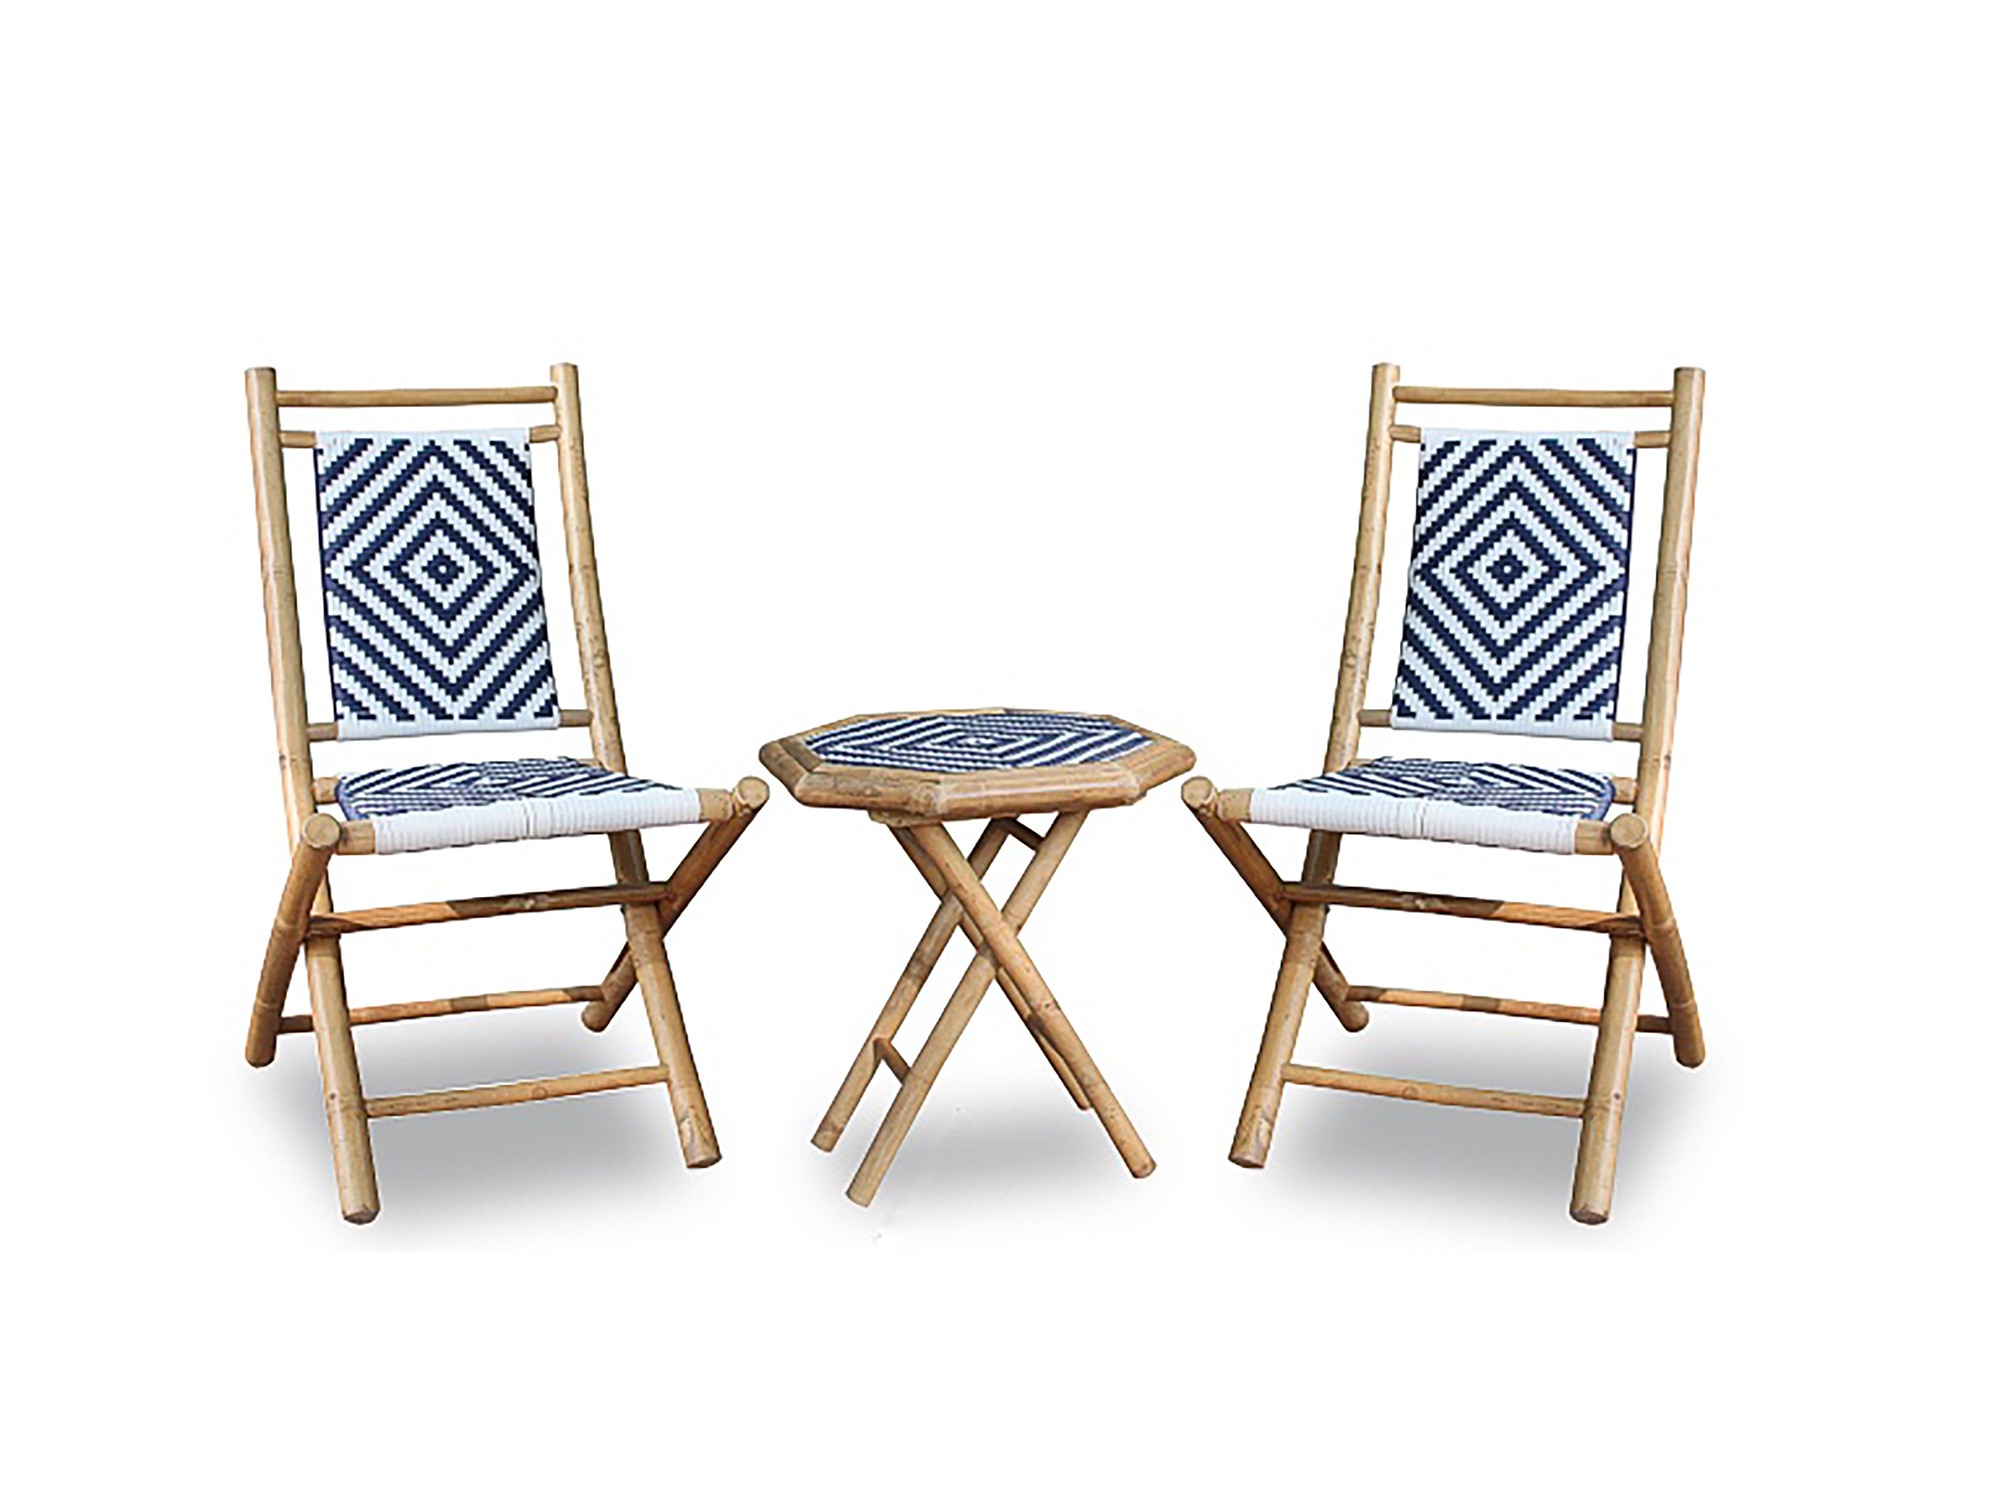 42" X 12" X 21" Natural Navy Blue and White Bamboo Outdoor Conversation Set of  Chairs and a Table